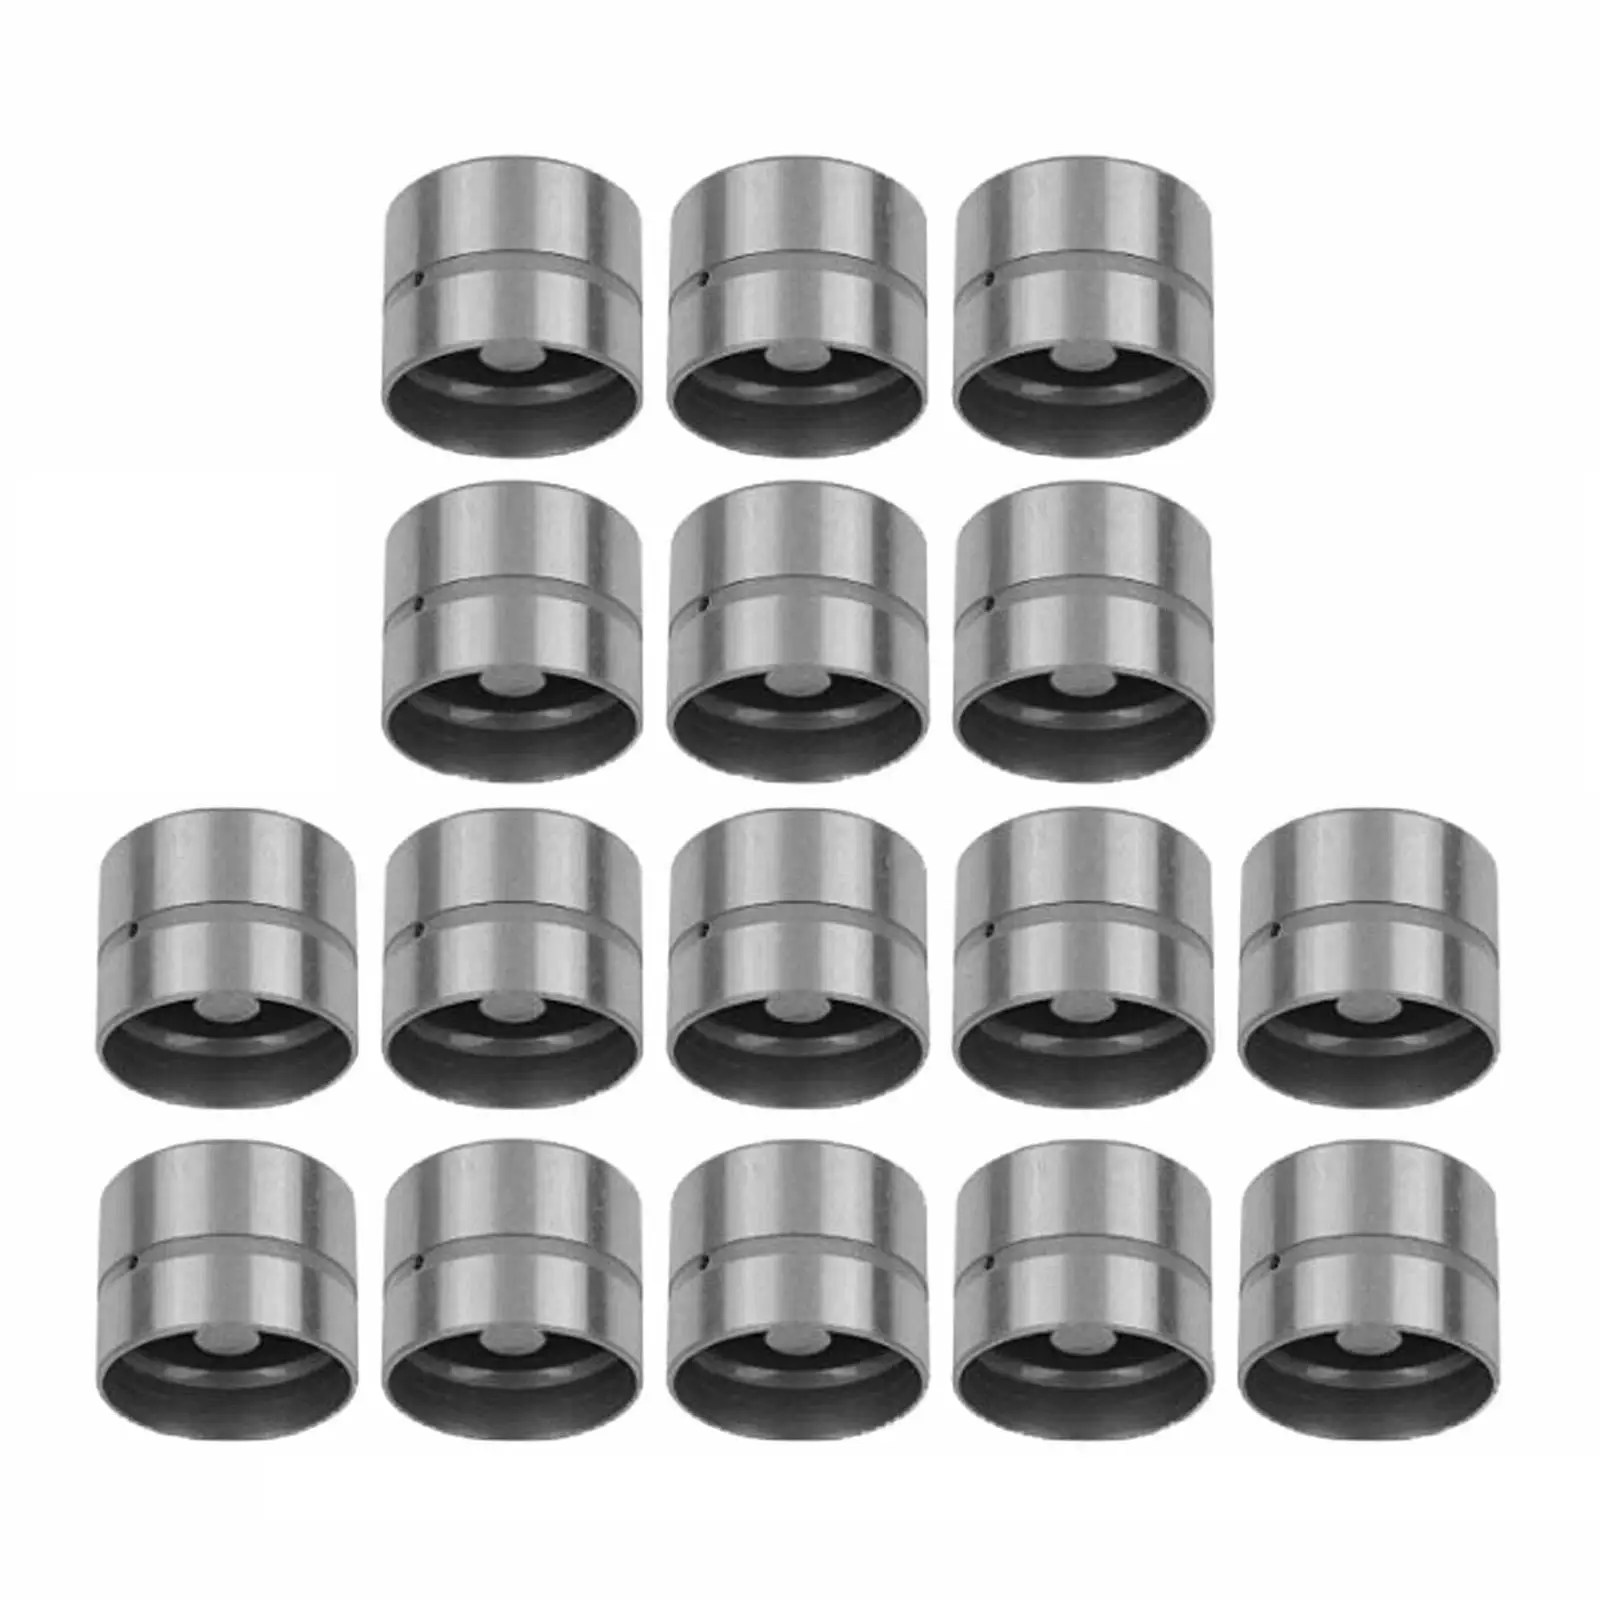 16Pcs Hydraulic Lifters Tappets Fit for 20XE C20XE C20Let x20Xev 420011810